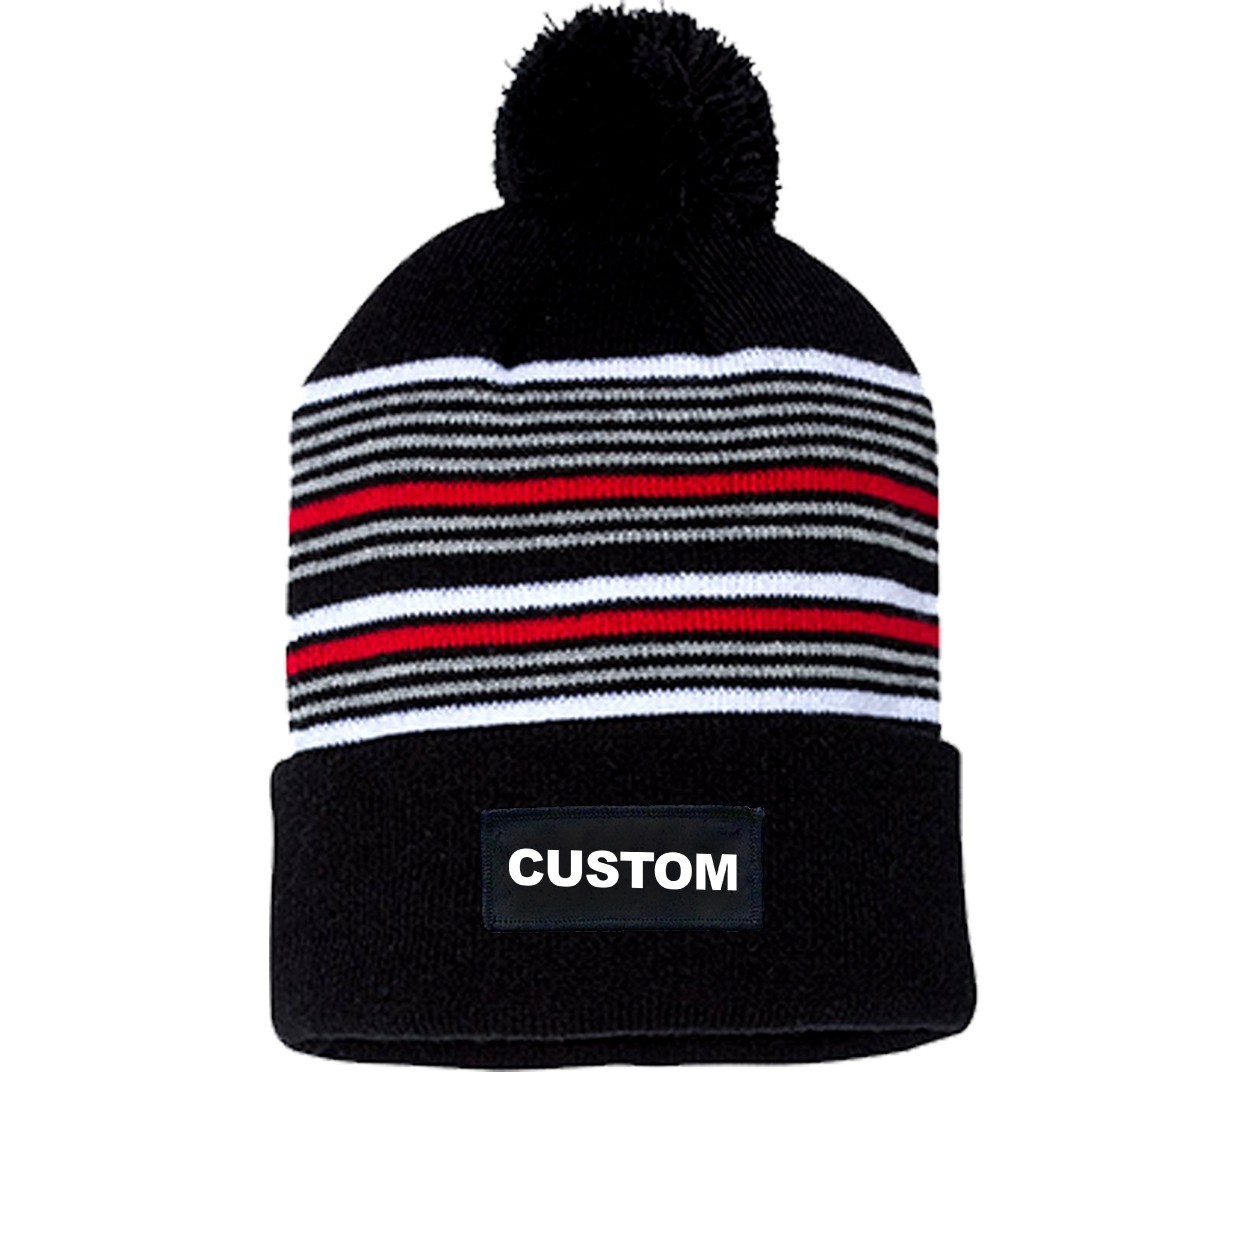 Custom Life Brand Logo Night Out Woven Patch Roll Up Pom Knit Beanie Black/ White/ Grey/ Red Beanie (White Logo)